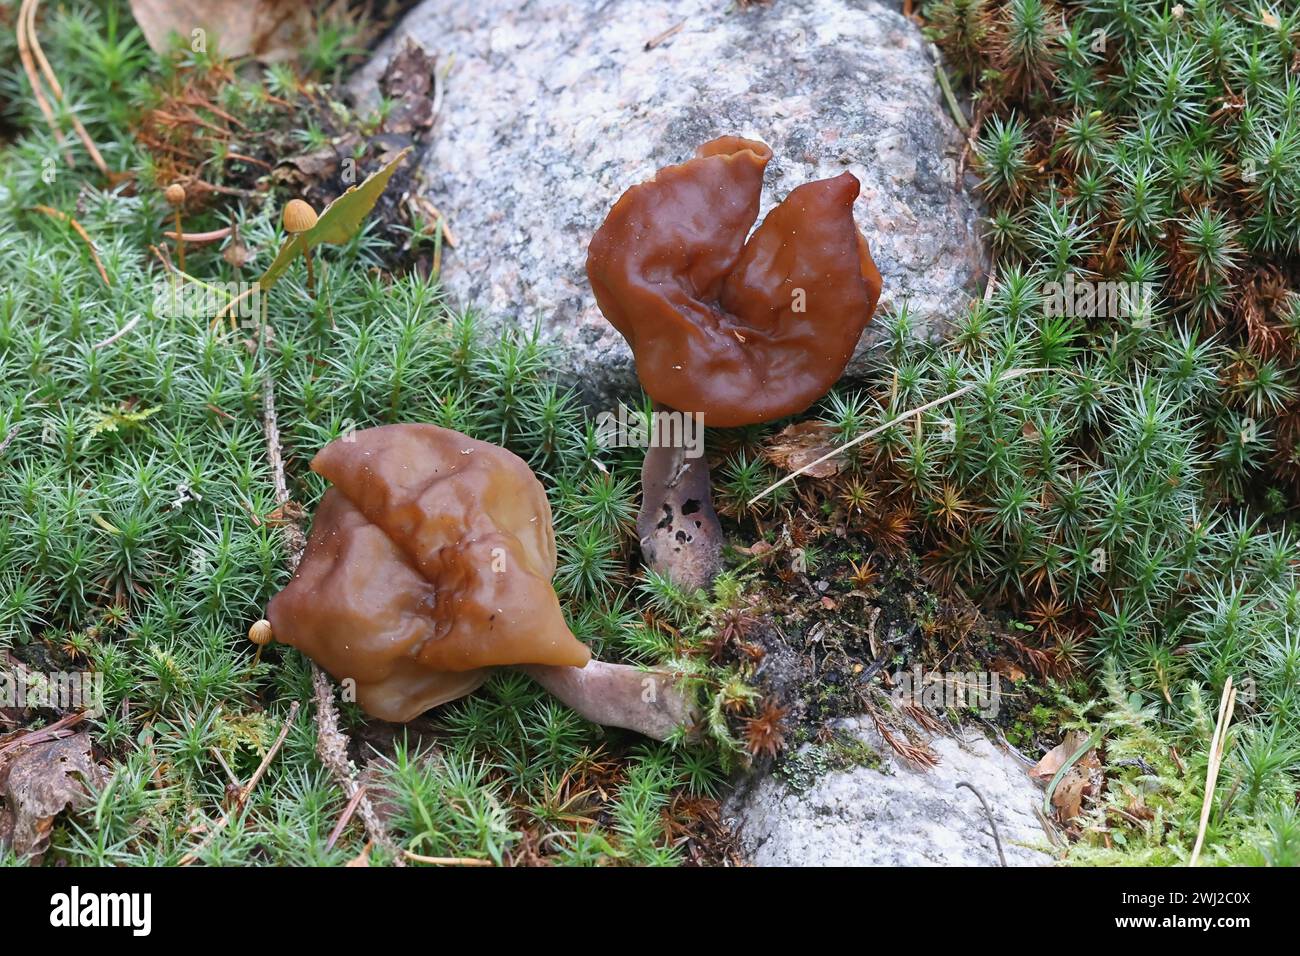 Gyromitra infula, commonly known as the hooded false morel or the elfin saddle, wild mushroom from Finland Stock Photo